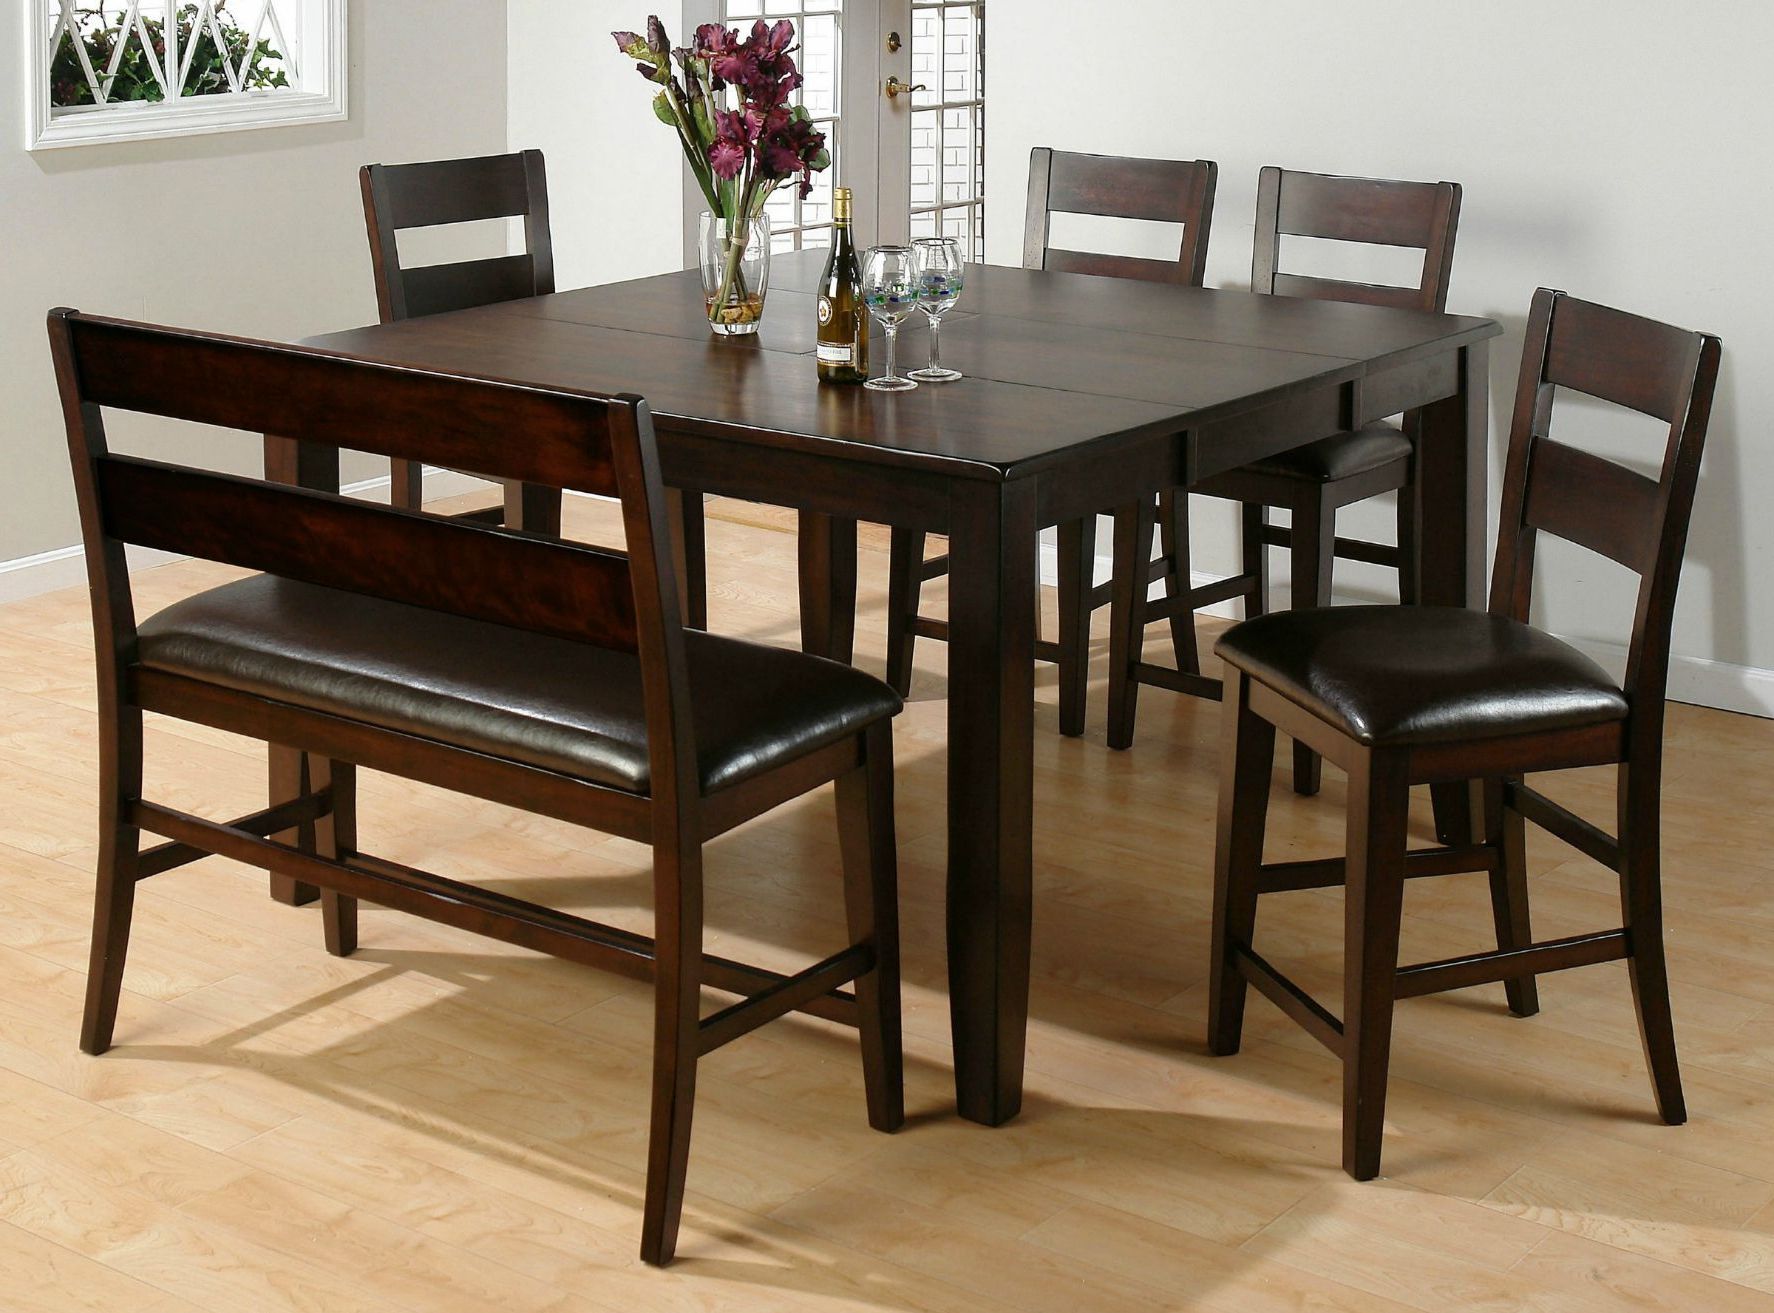 26 Dining Room Sets (big And Small) With Bench Seating (2020 Regarding Trendy Transitional 4 Seating Drop Leaf Casual Dining Tables (View 8 of 30)